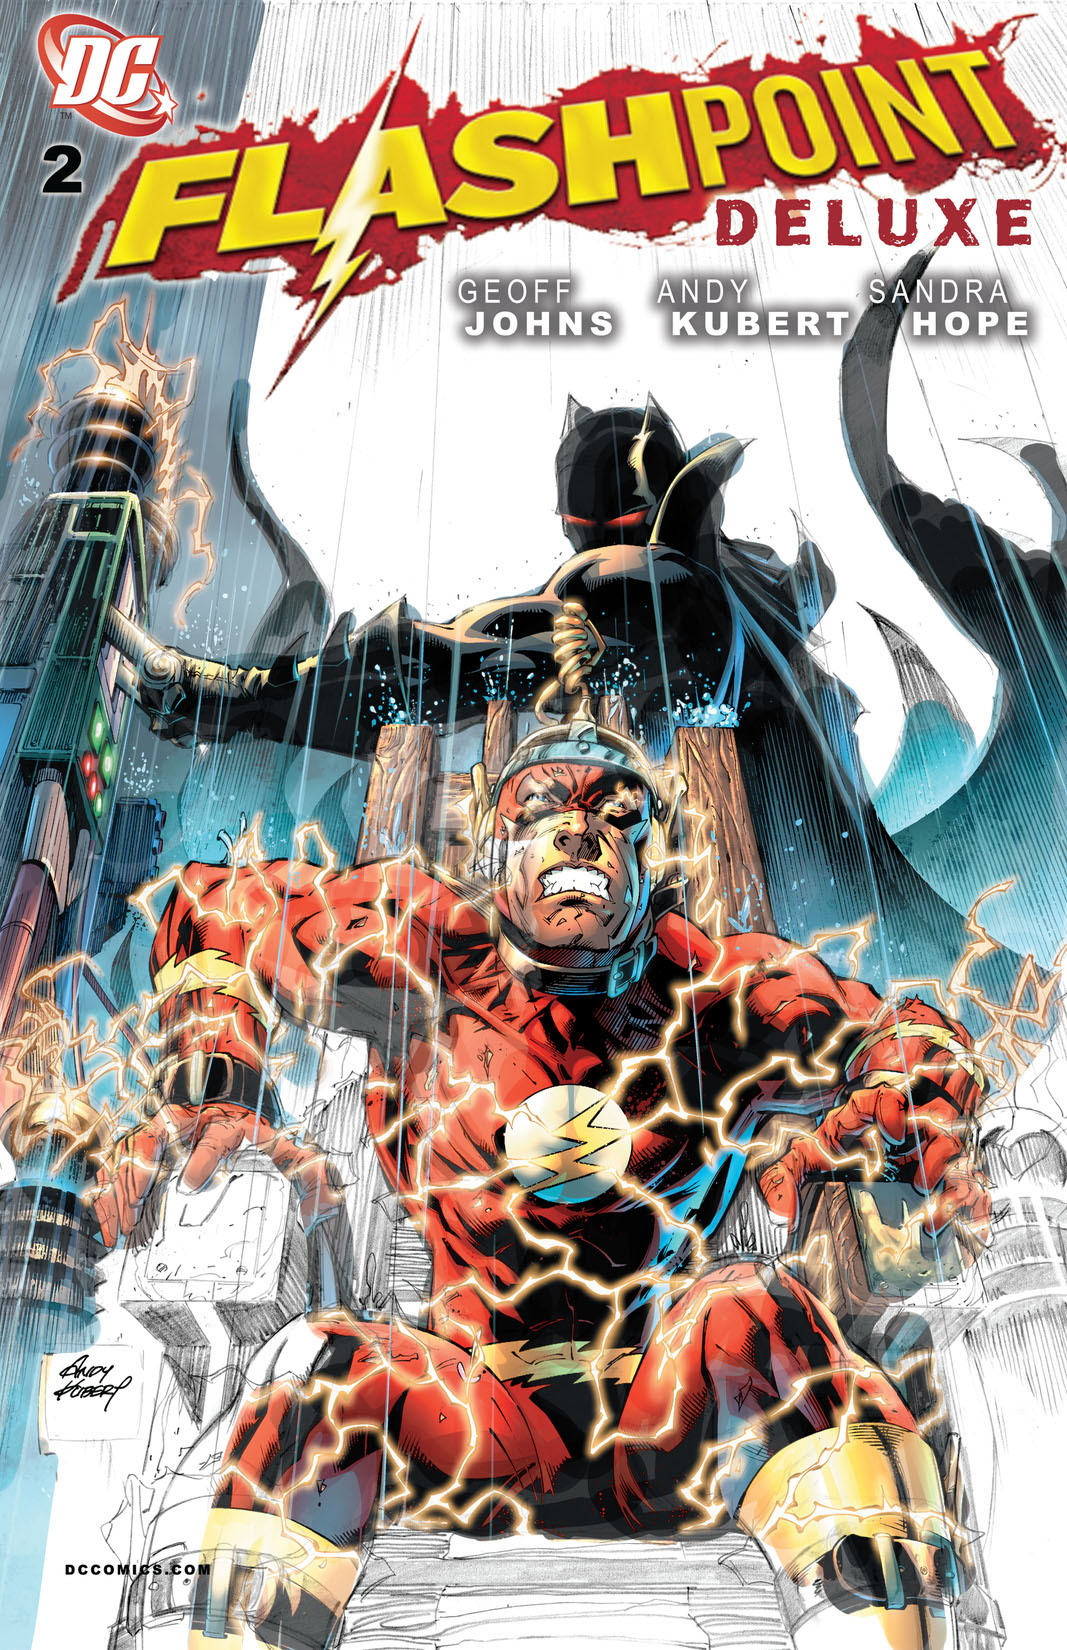 Flashpoint Digital Deluxe #2 preview images